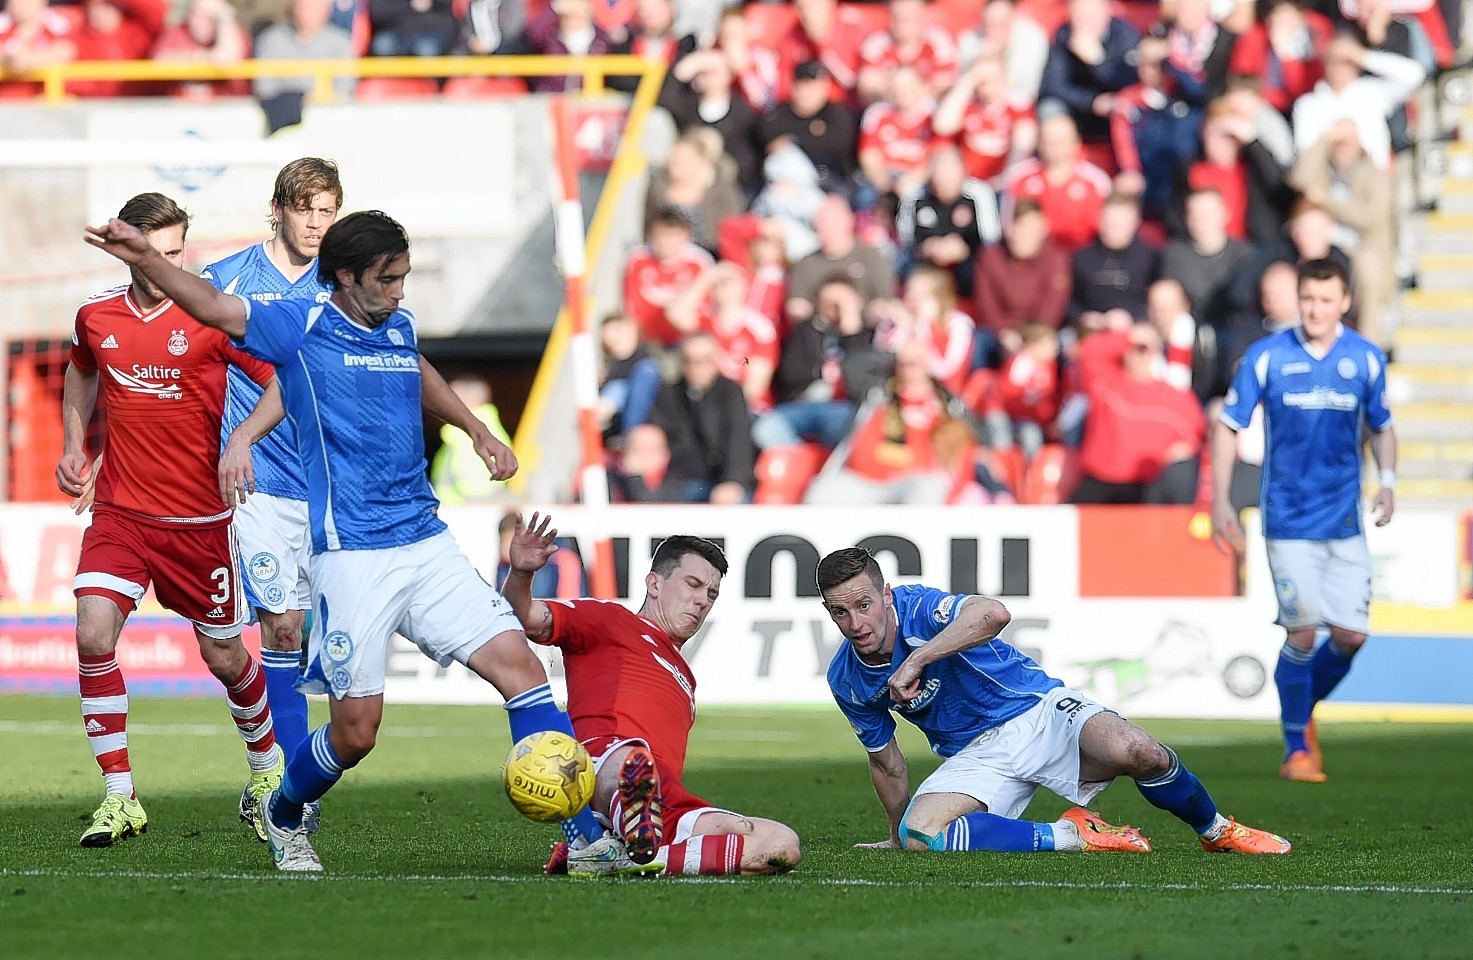 Aberdeen will face St Johnstone on Saturday, April 29.